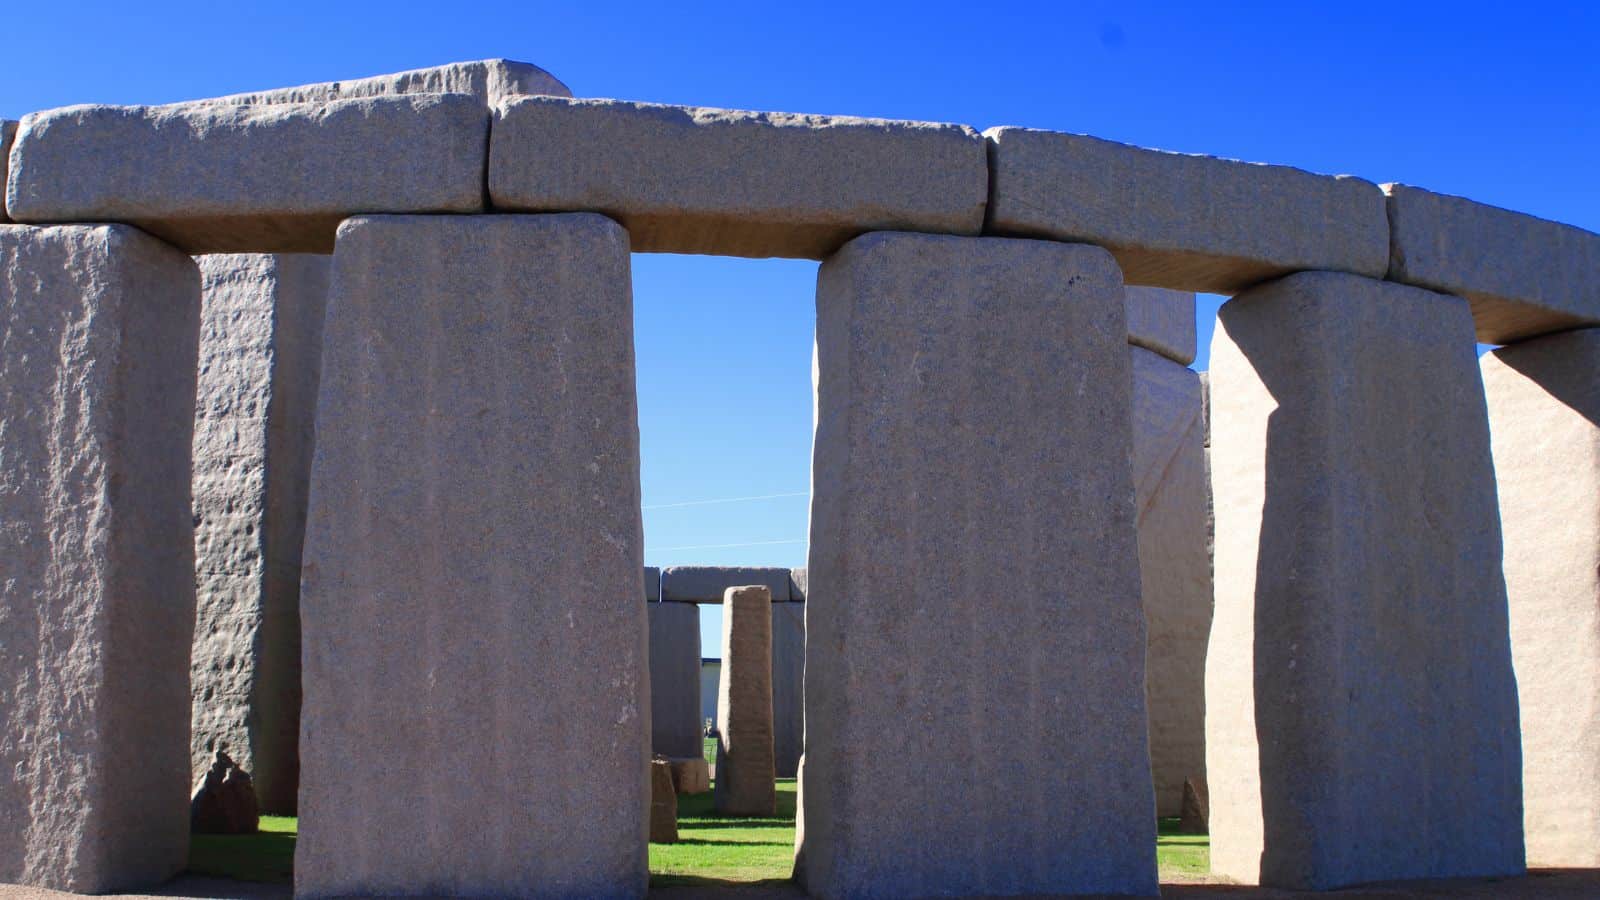 <p>Foamhenge offers a lighthearted take on the iconic Stonehenge, but it quickly loses its novelty once you see it in person. Most people prefer the real thing or nothing at all.</p>